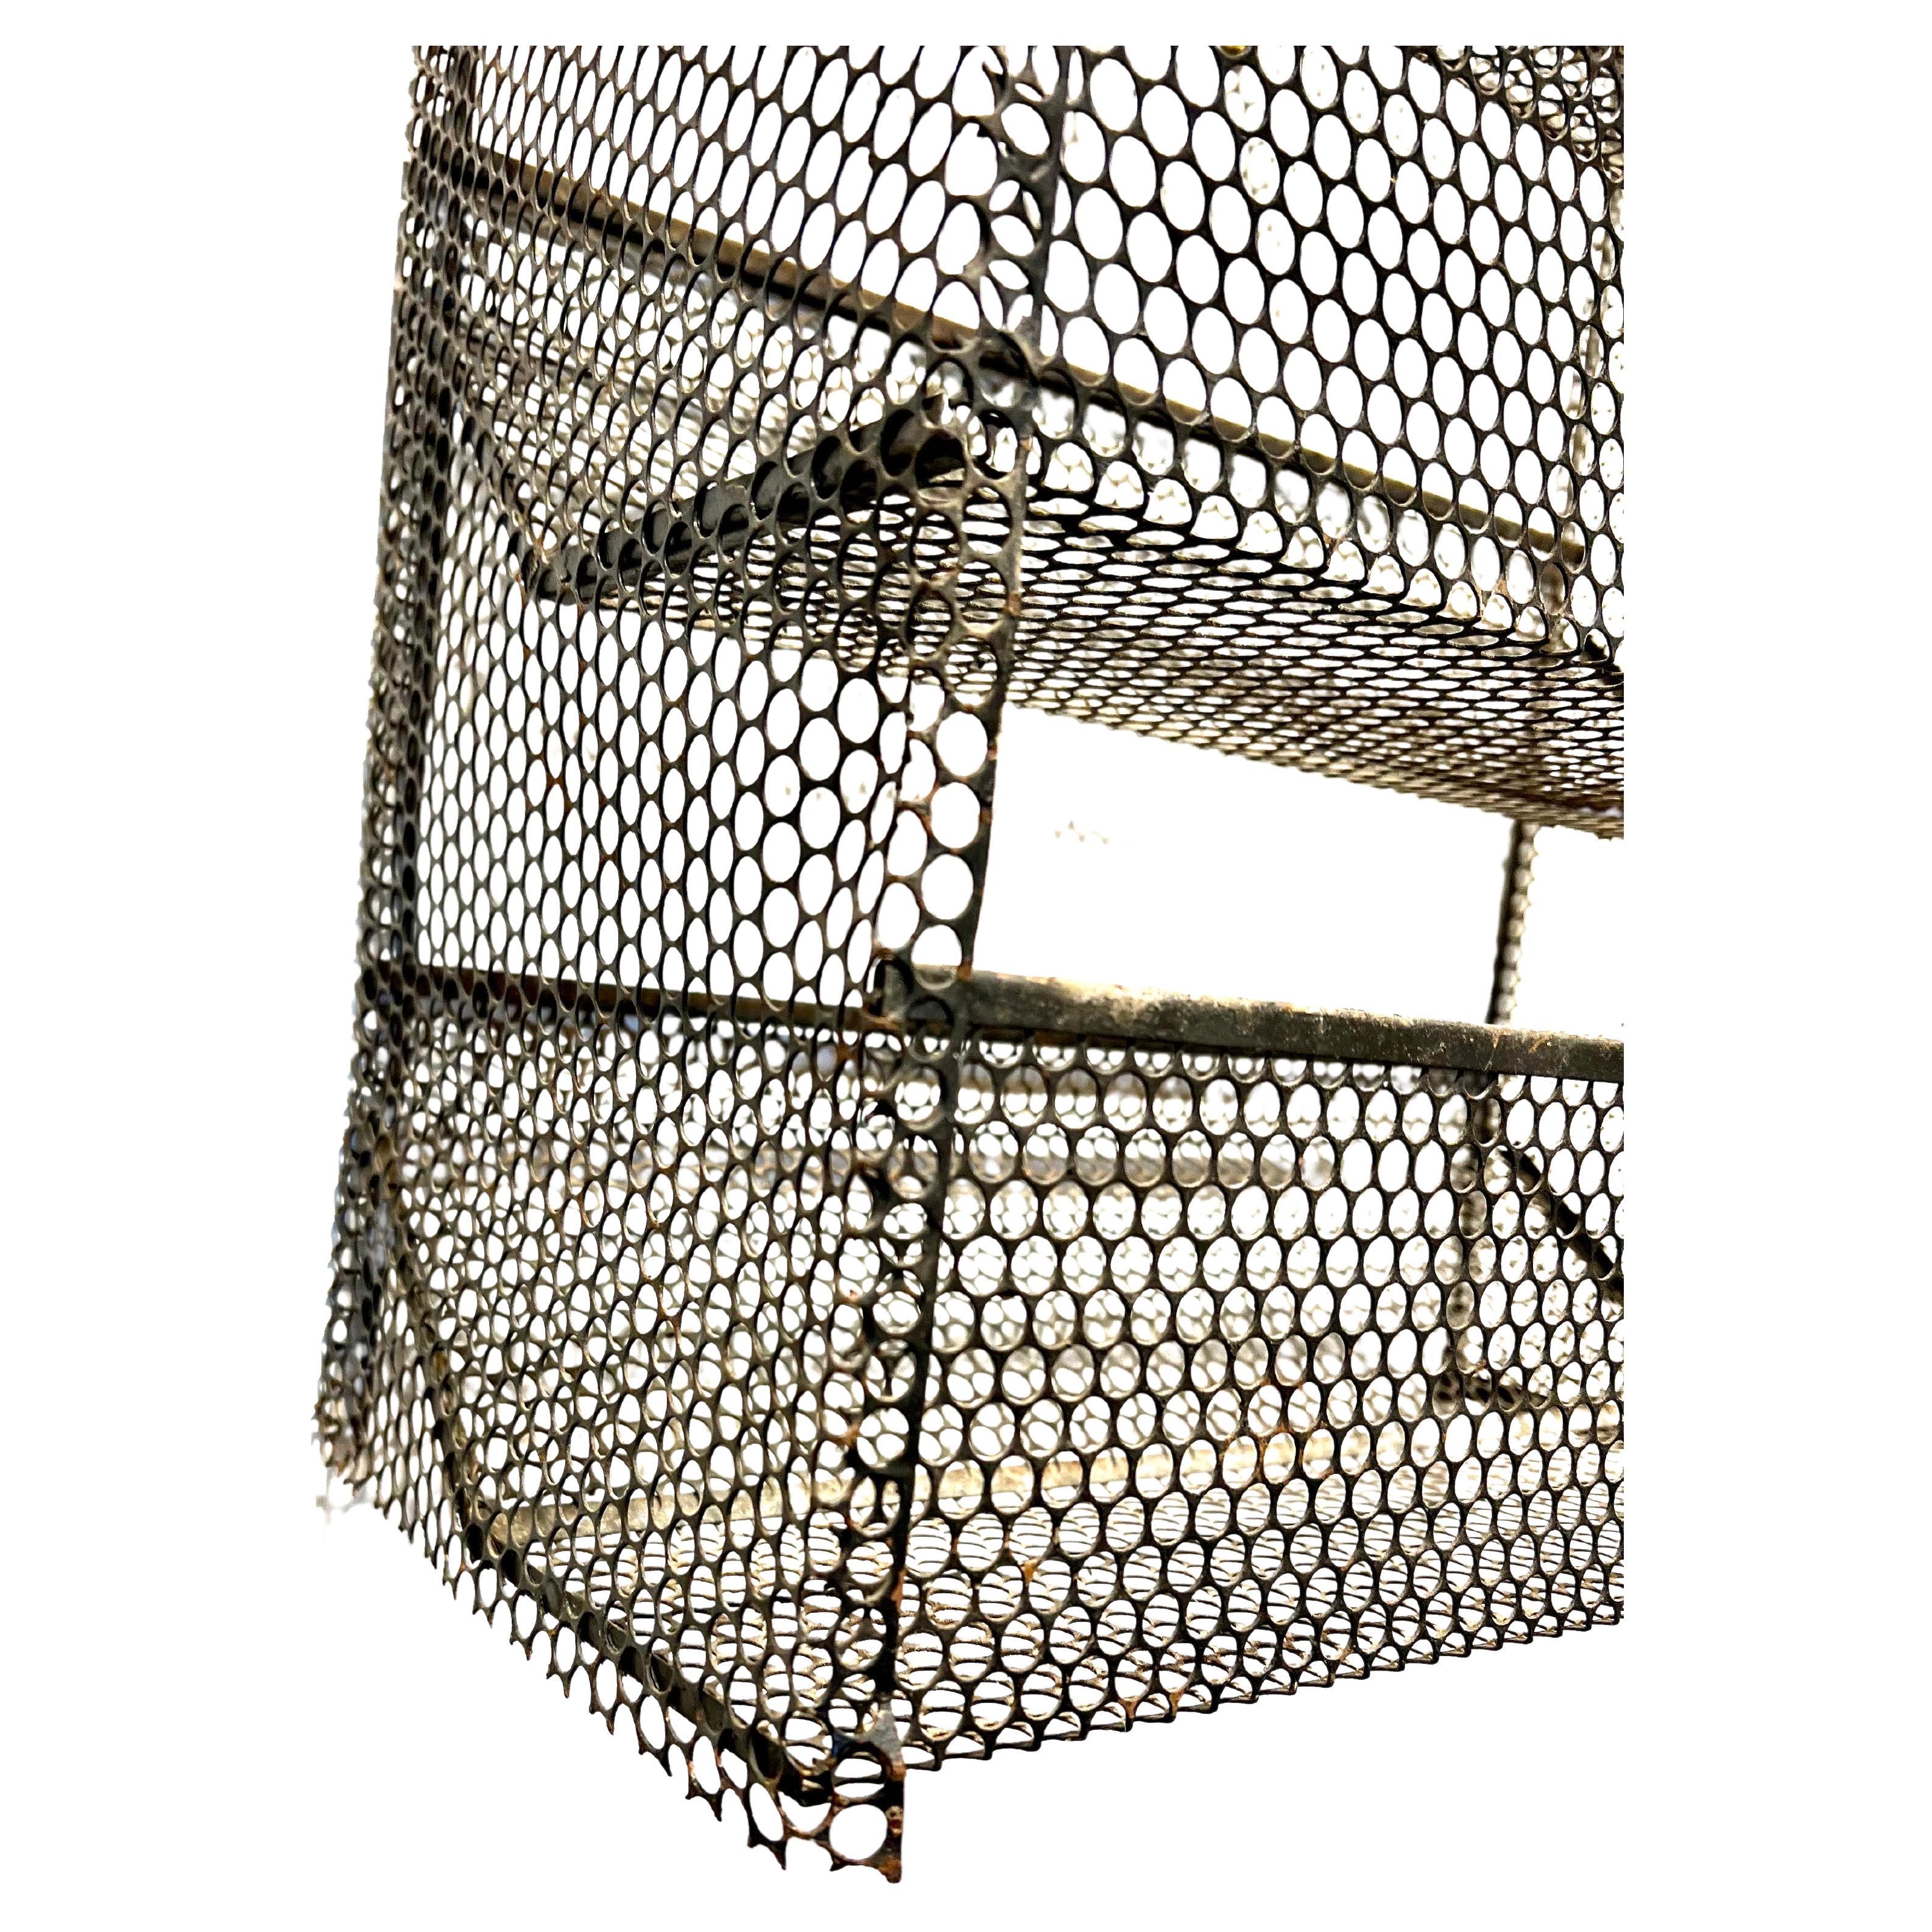 Mid-Century Modern Industrial Perforated Metal Catch It All Portable Caddy